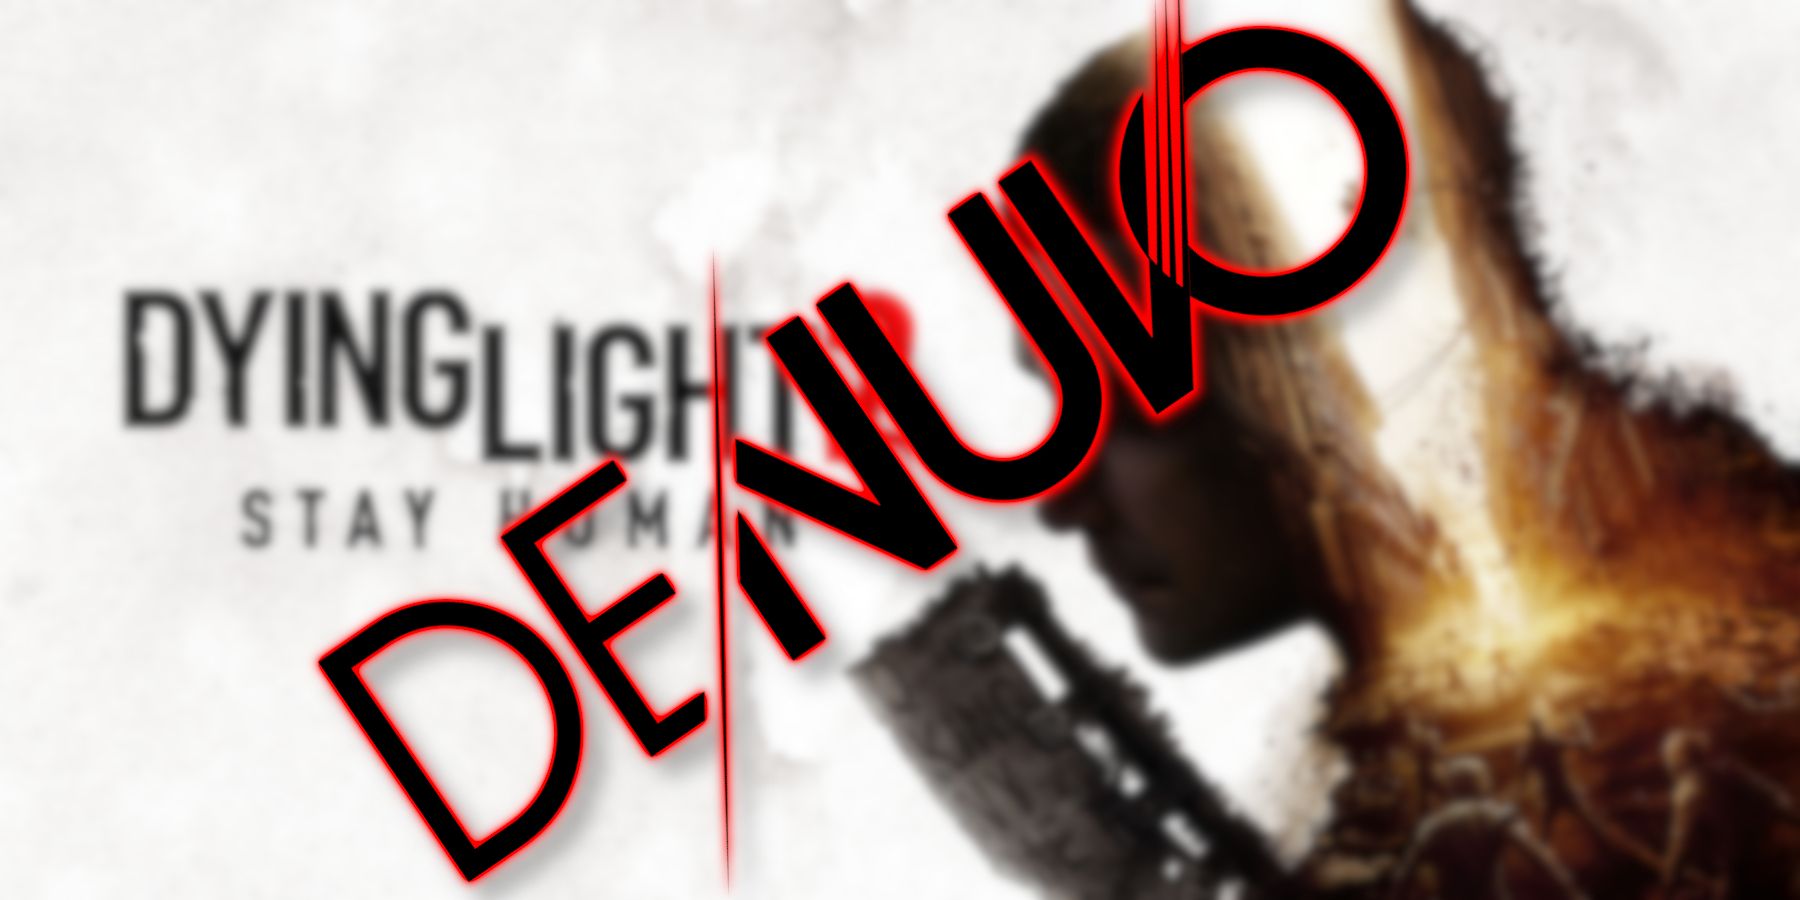 Reveal of Dying Light 2 Denuvo DRM Angers Fans